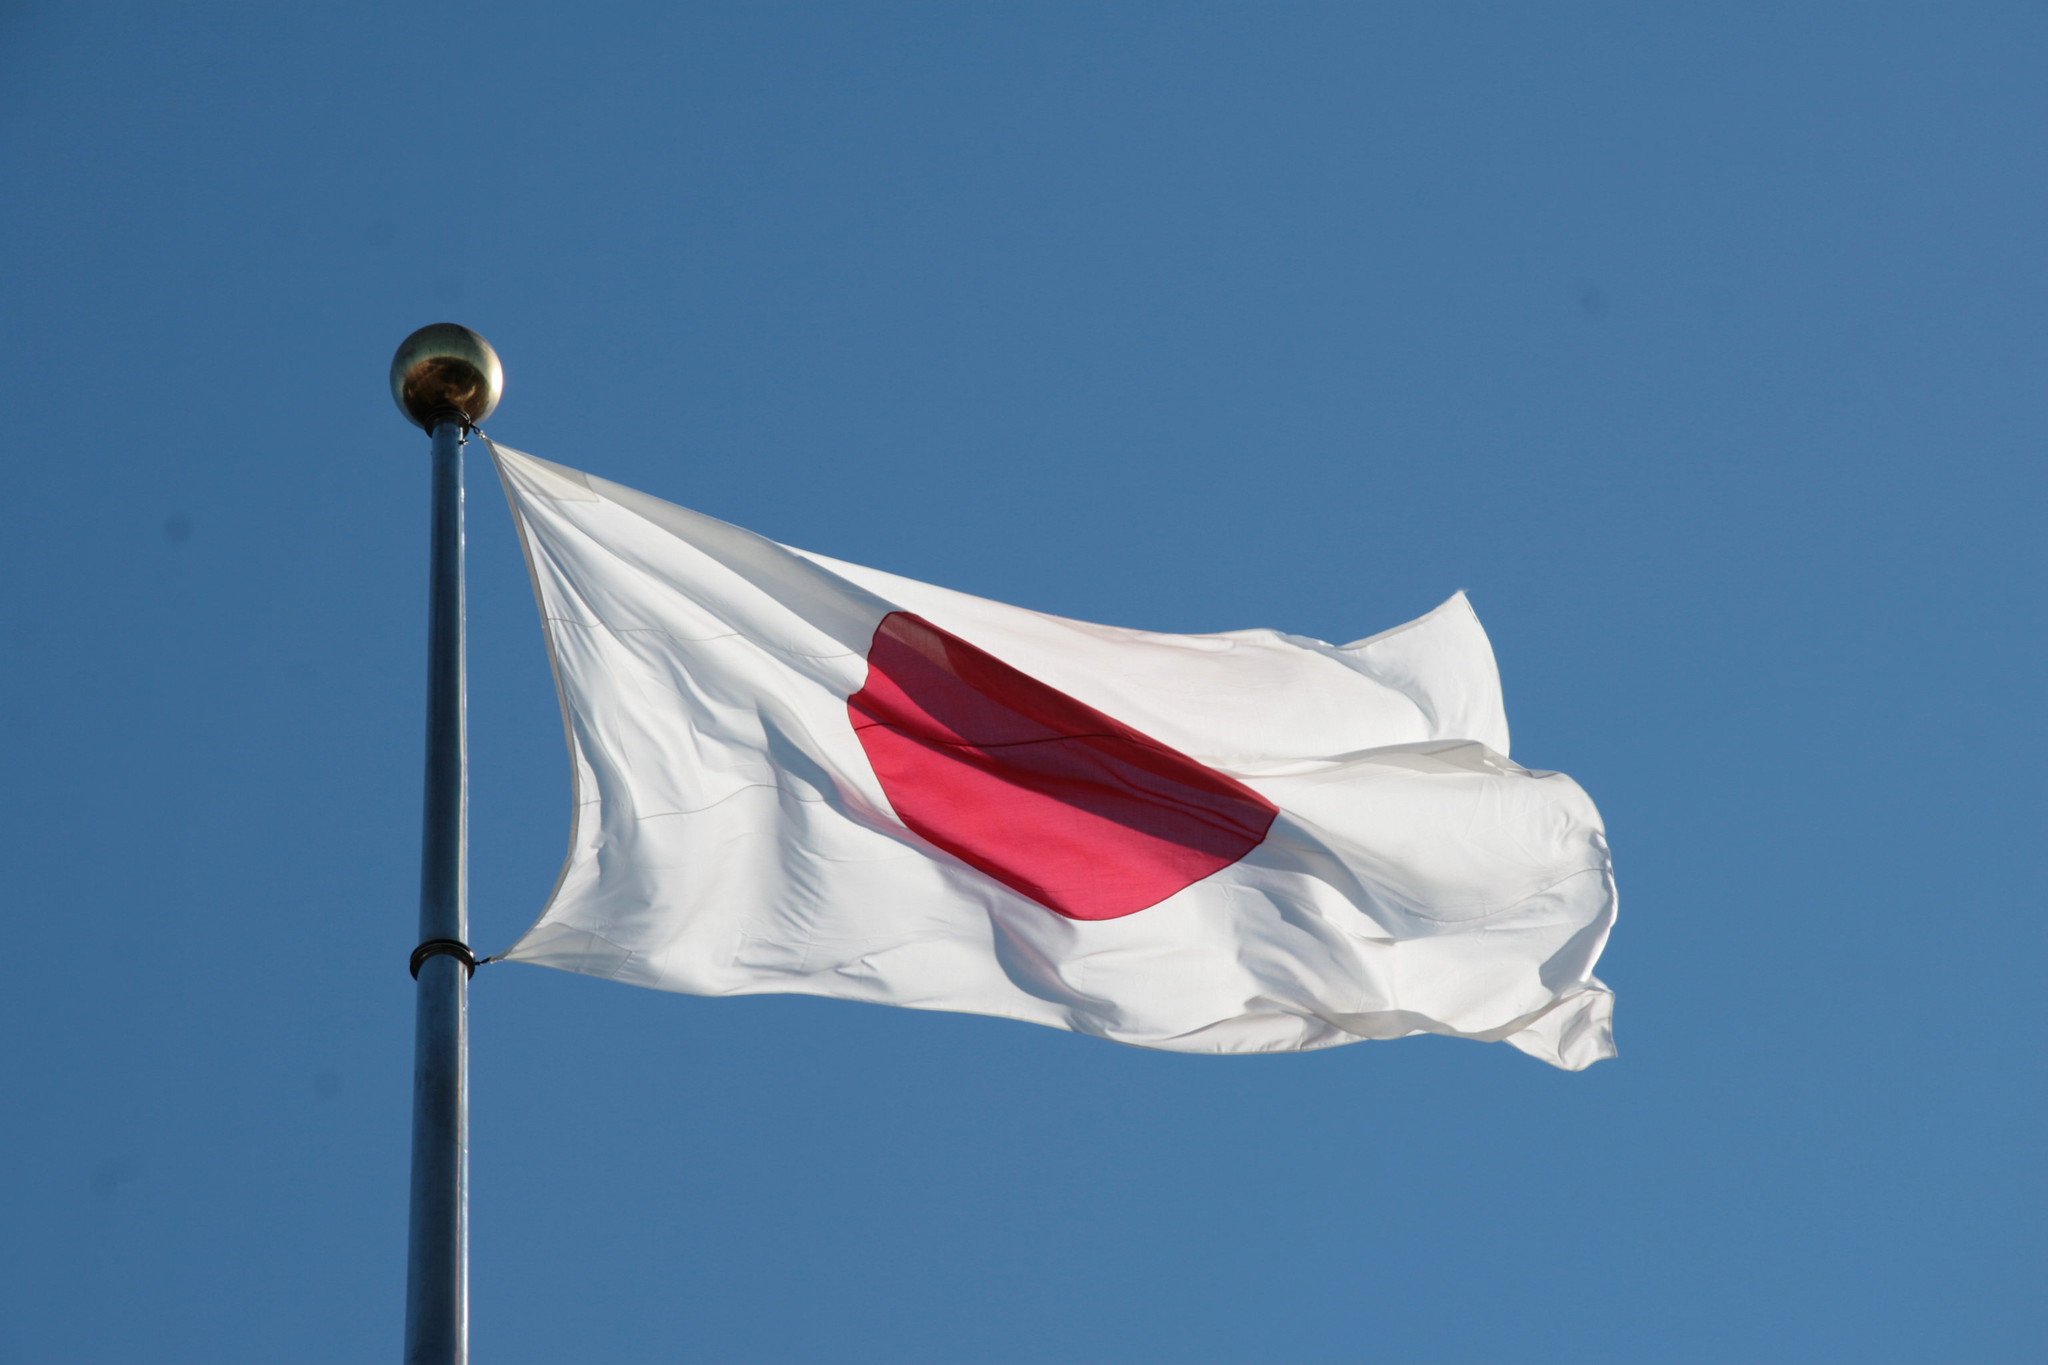 Japan To Lift Ban On Foreign Stablecoins In 2023: Report